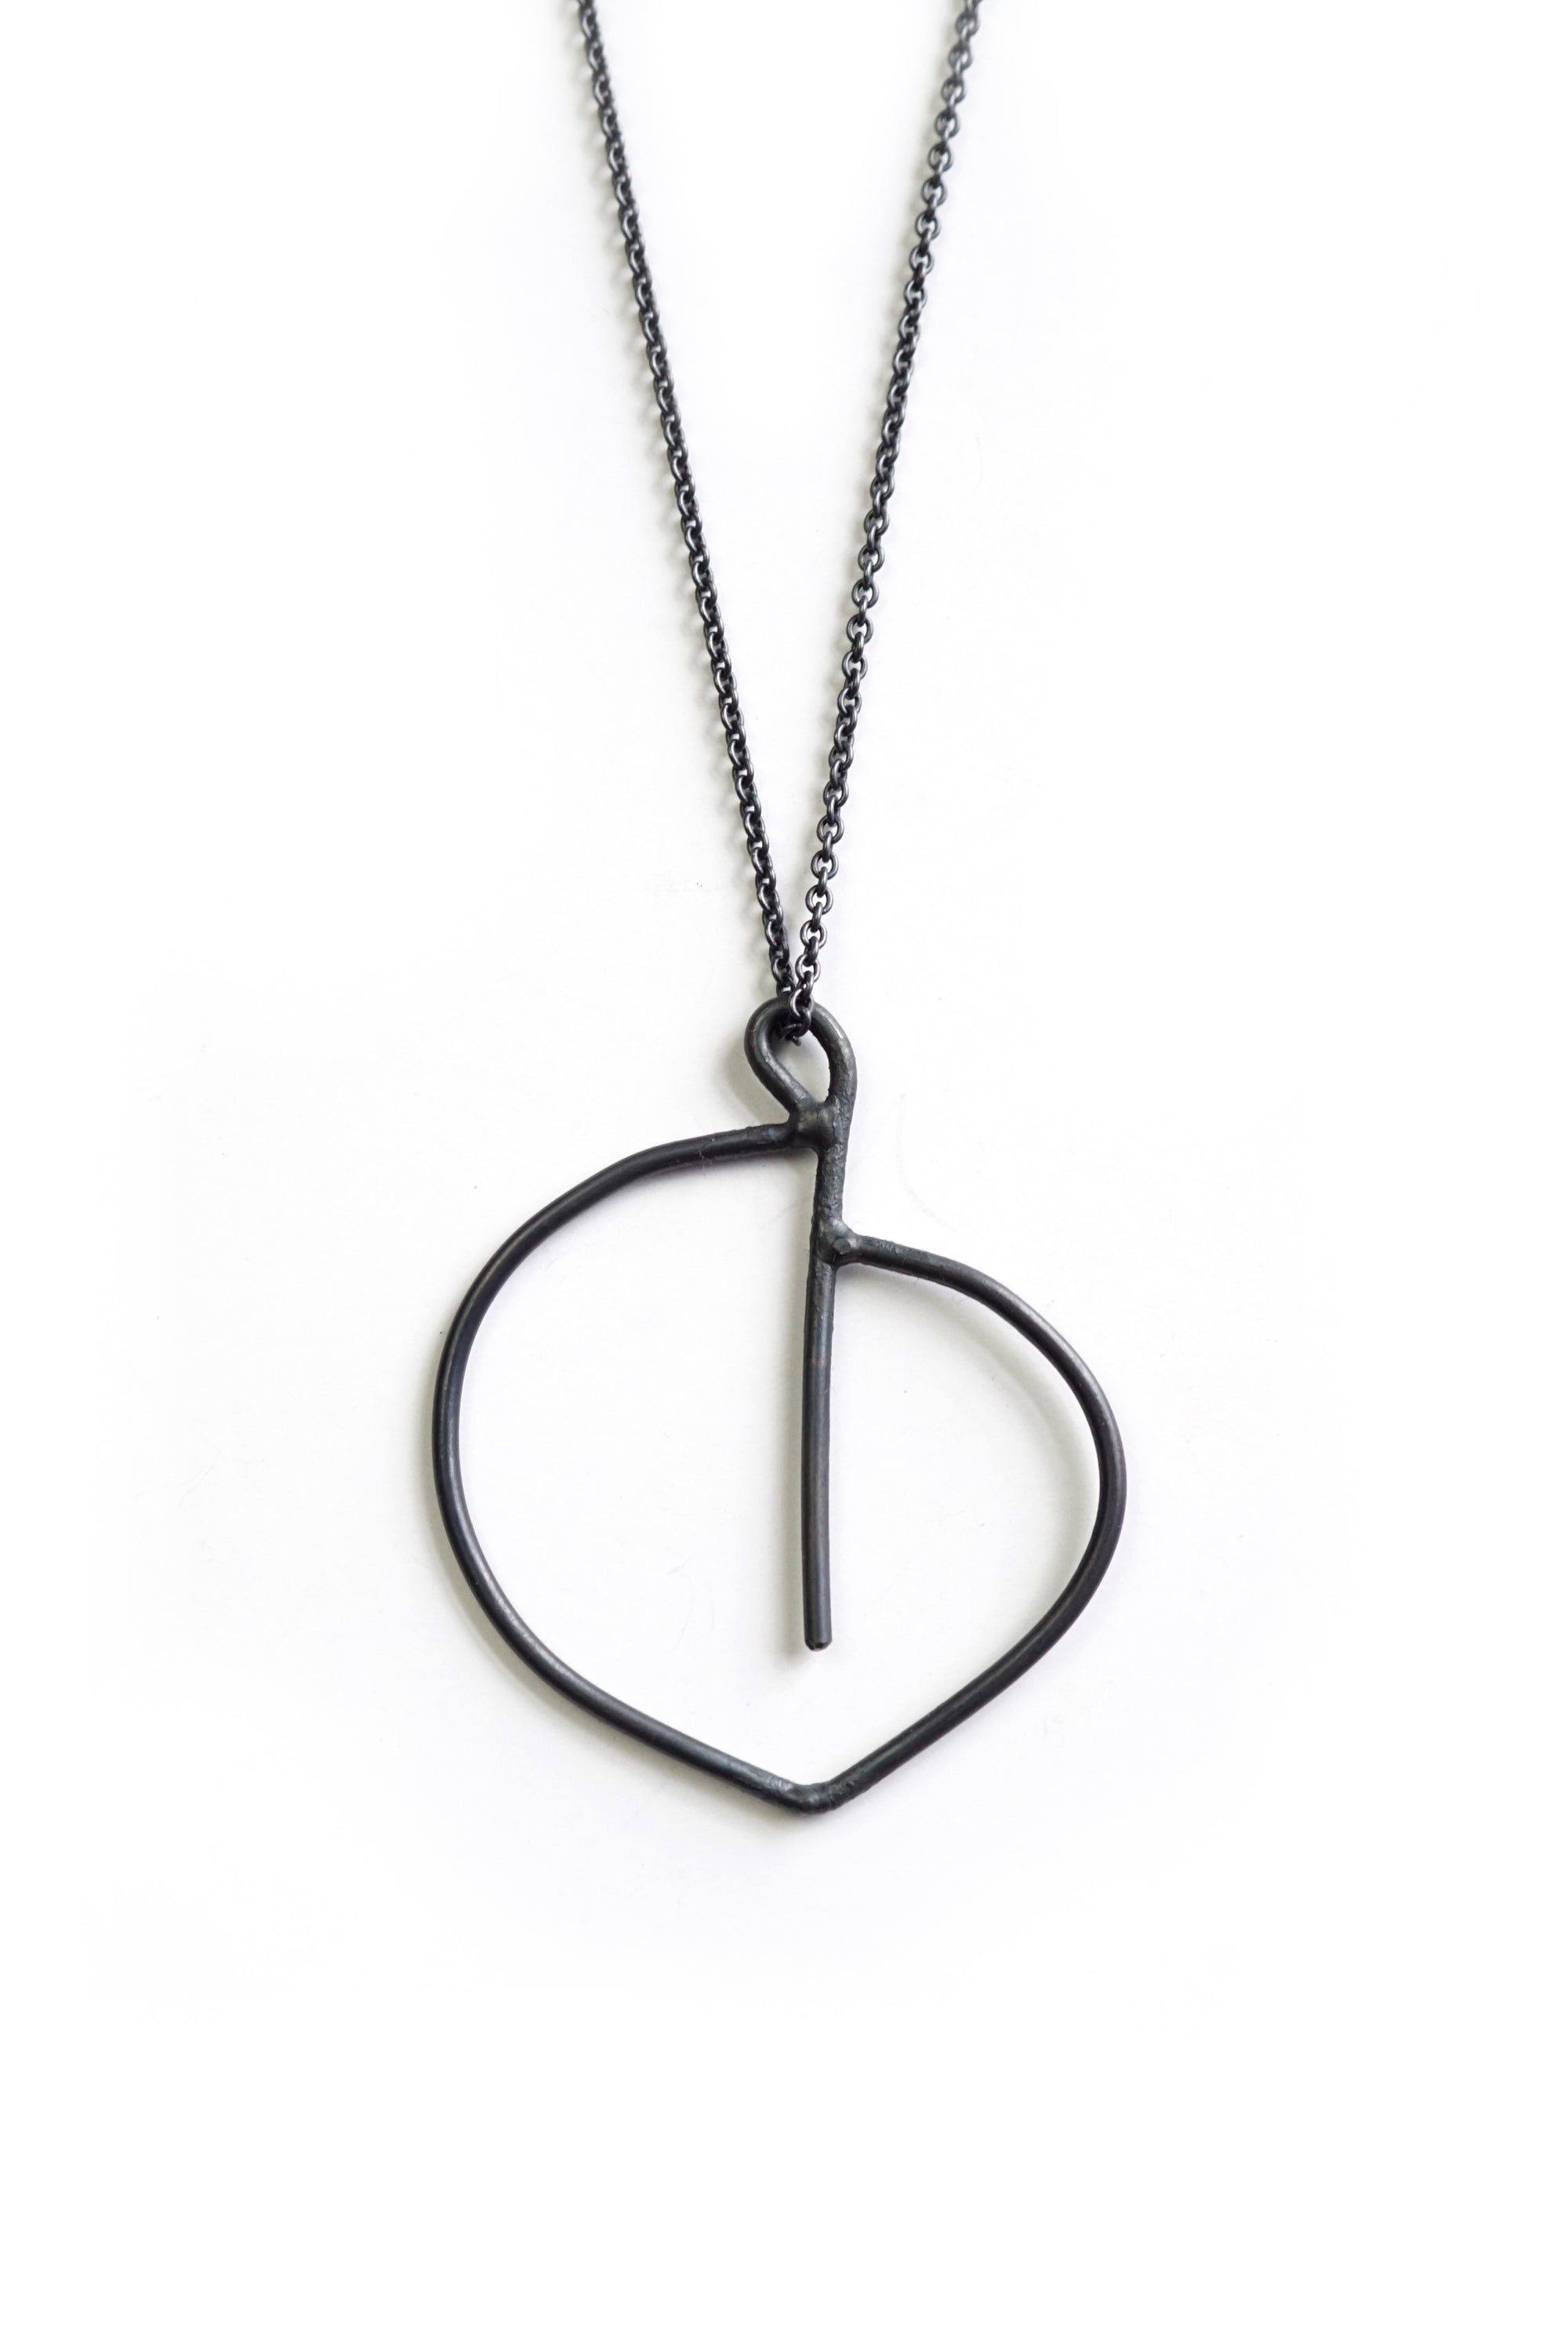 Courbe Necklace in black steel, silver, or bronze